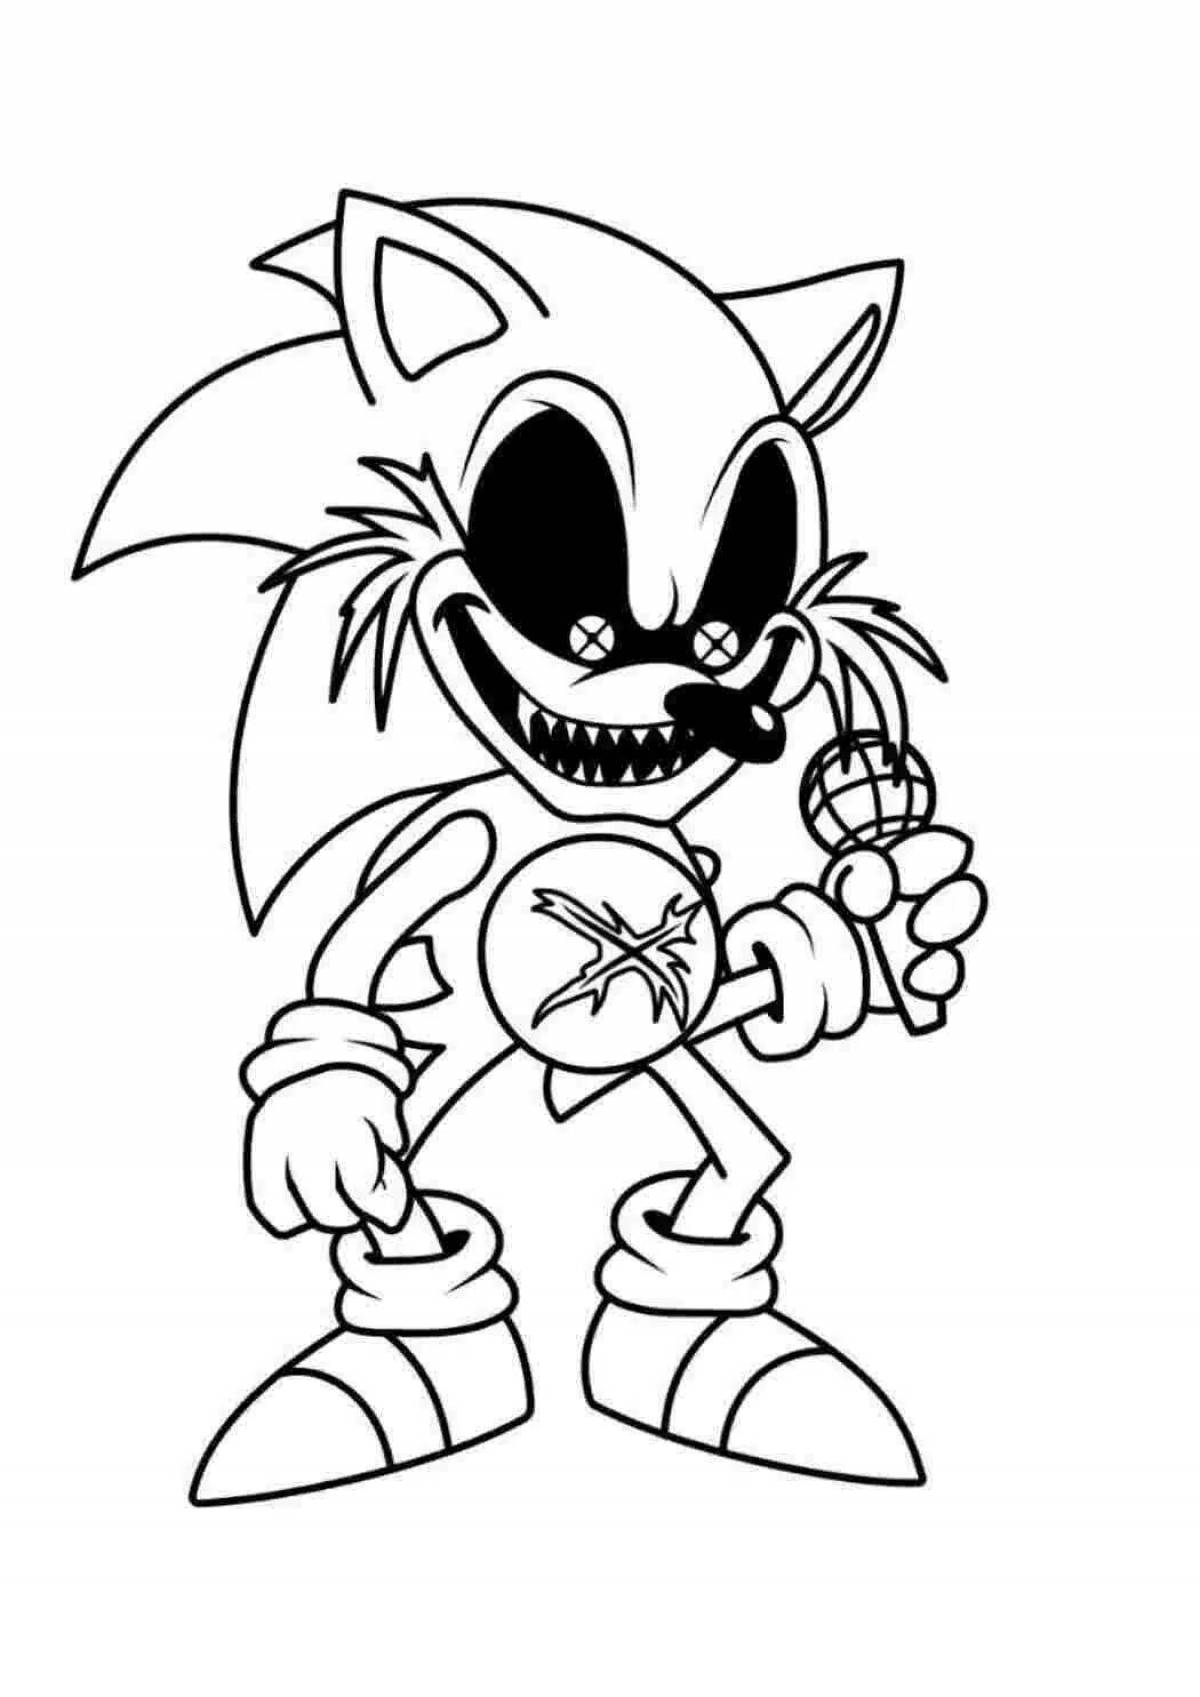 Super sonic exe dazzling coloring book